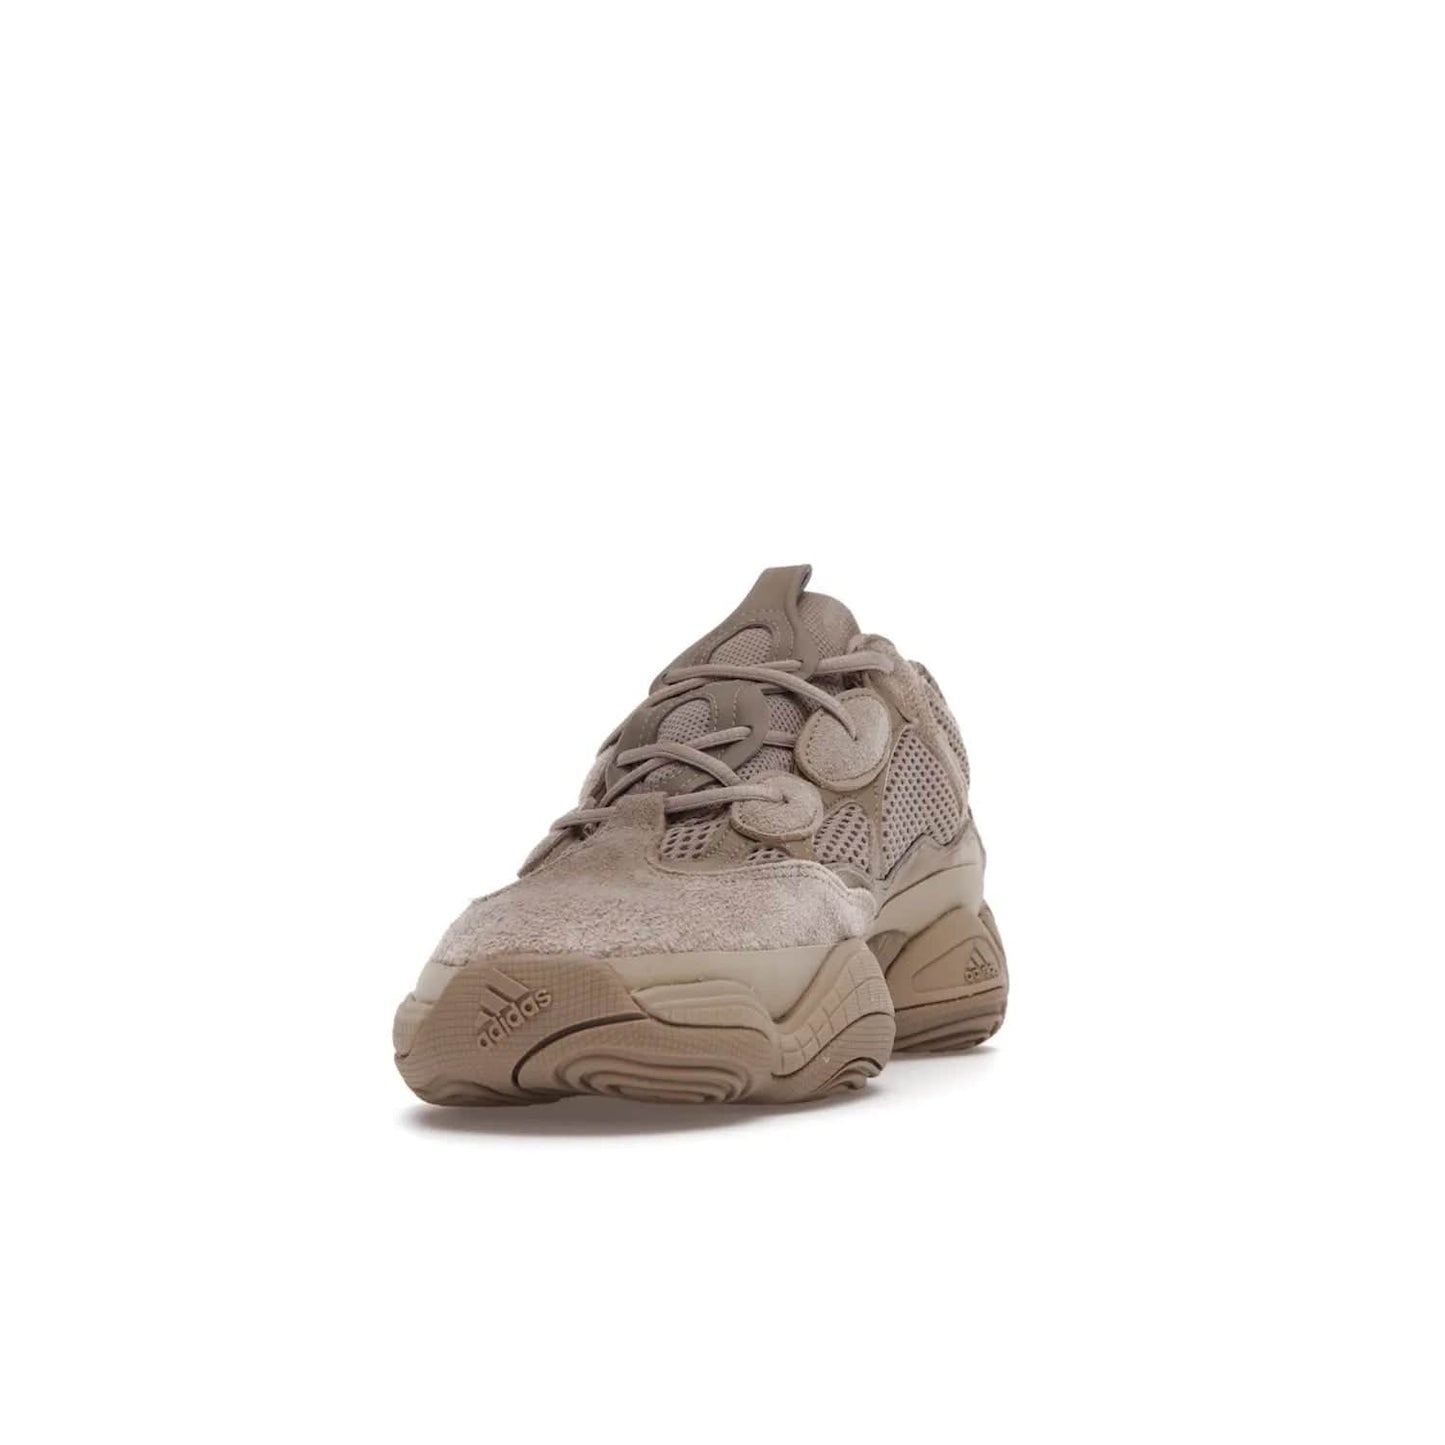 adidas Yeezy 500 Taupe Light - Image 12 - Only at www.BallersClubKickz.com - The adidas Yeezy 500 Taupe Light combines mesh, leather, and suede, with a durable adiPRENE sole for an eye-catching accessory. Reflective piping adds the perfect finishing touches to this unique silhouette. Ideal for any wardrobe, releasing in June 2021.